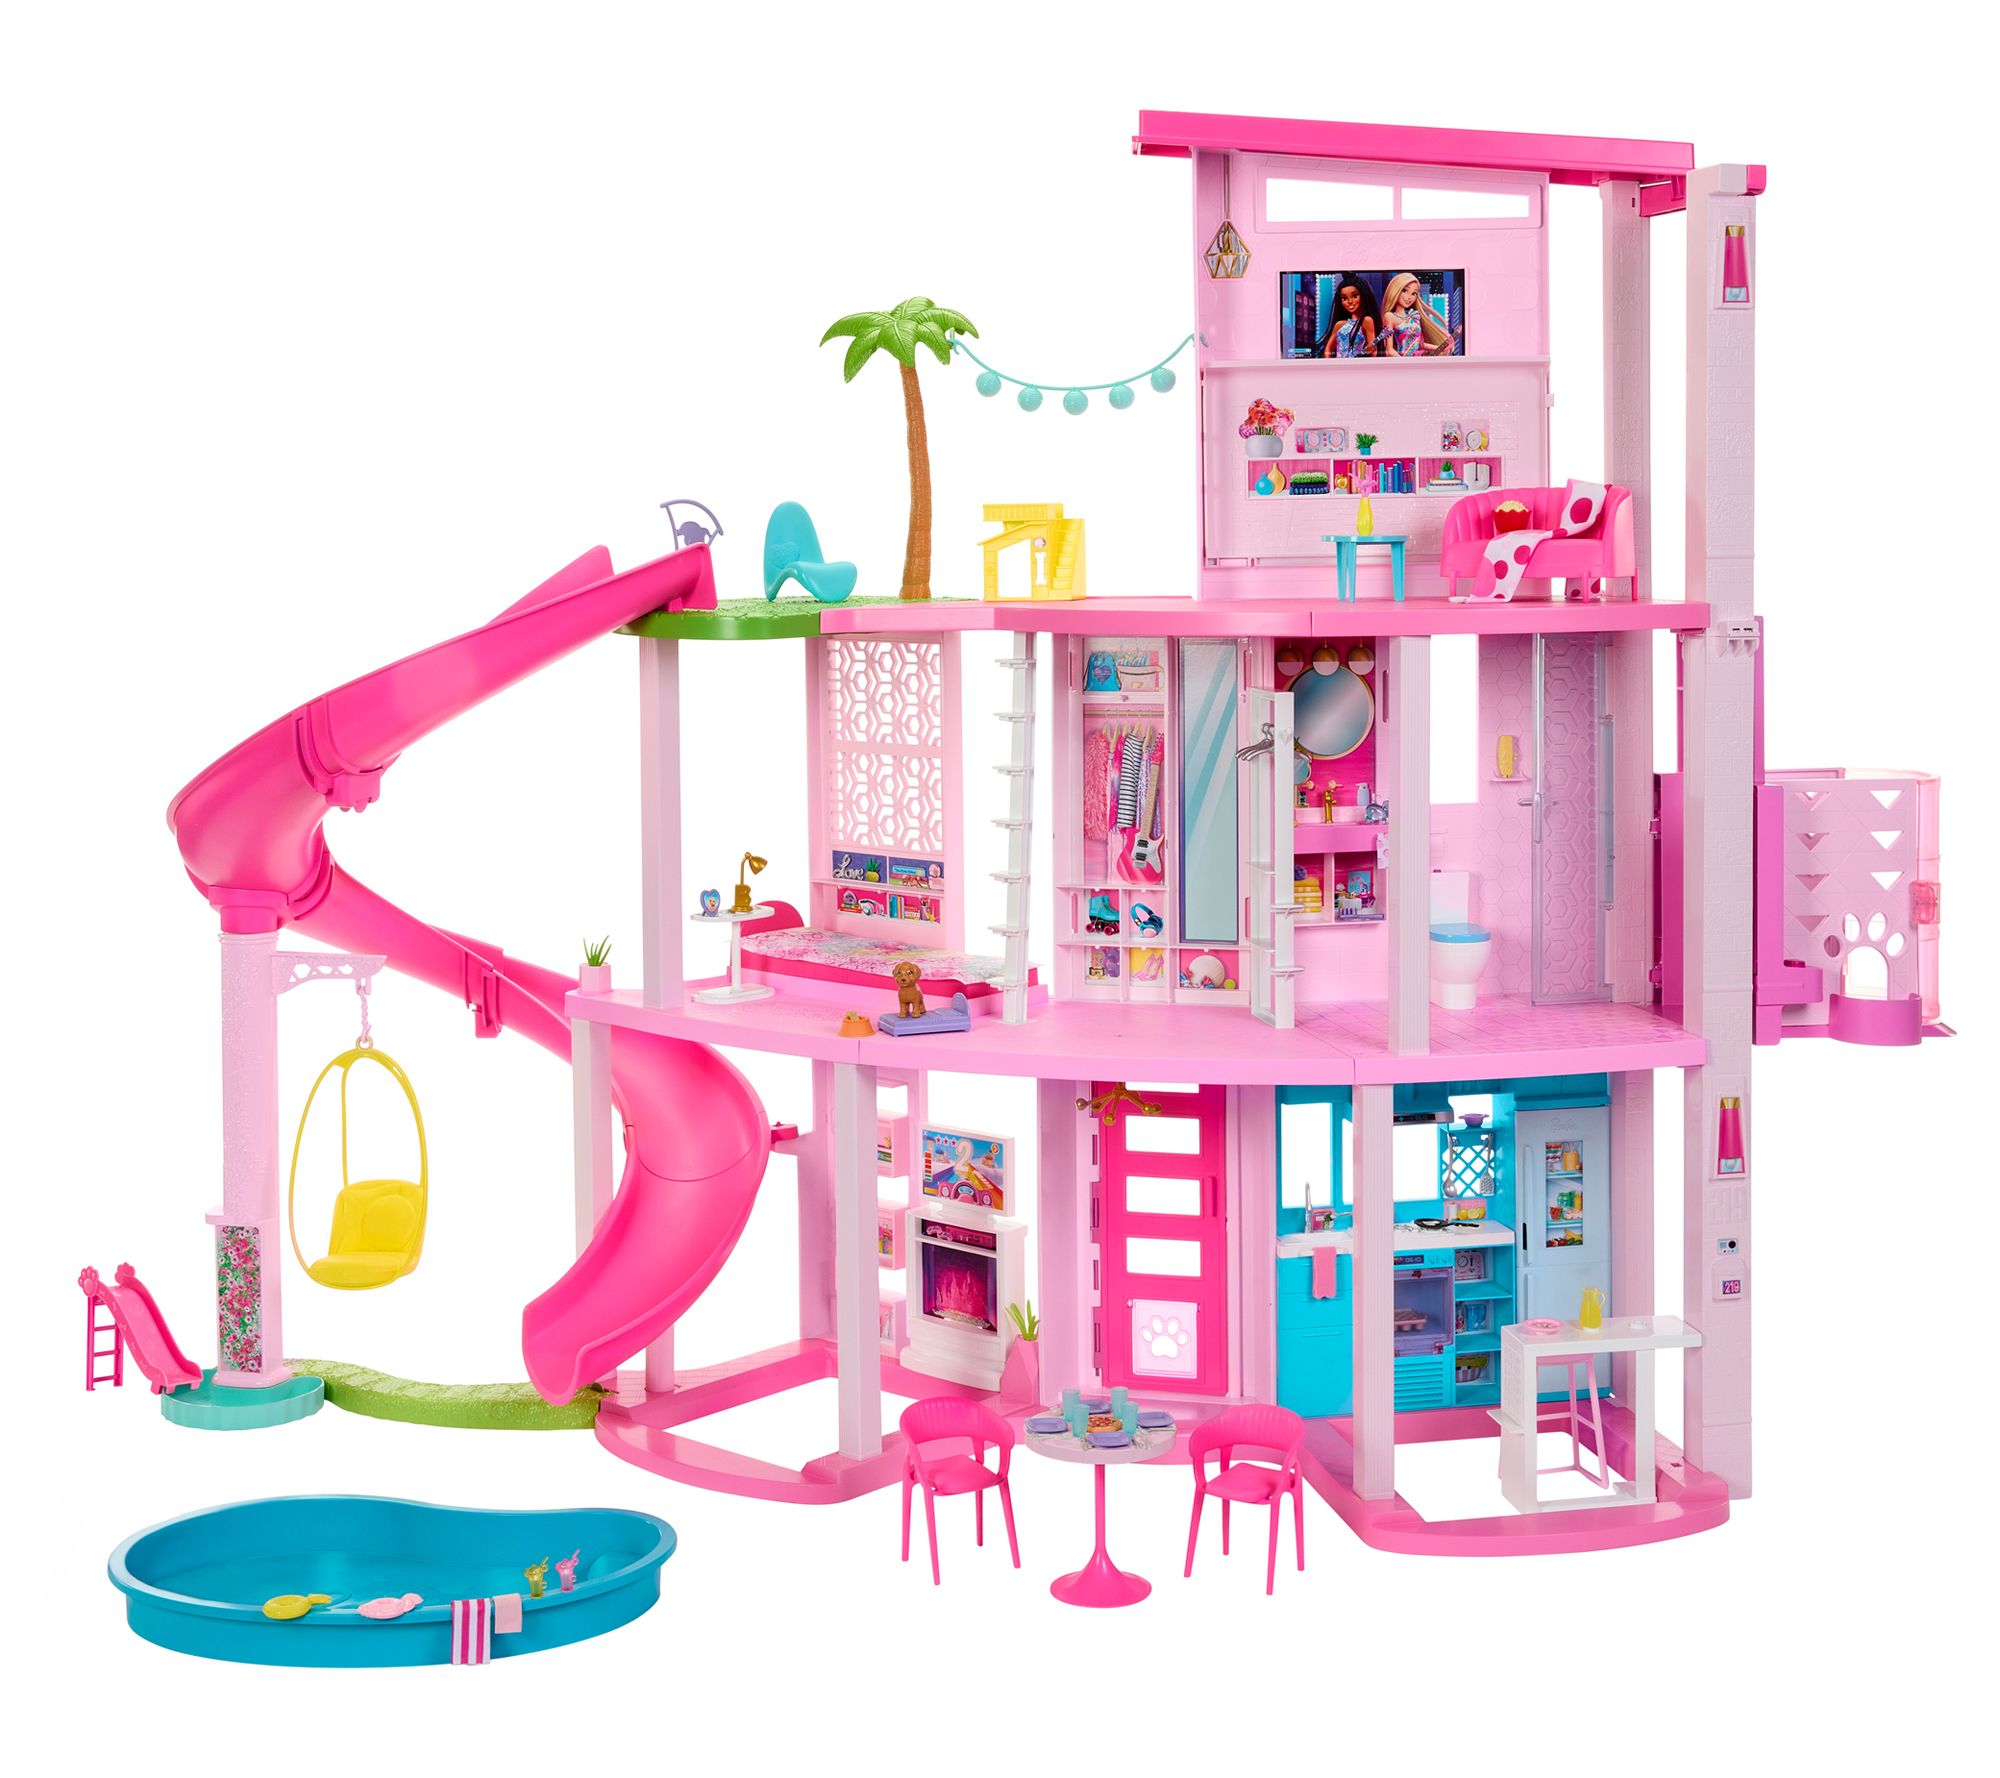 60 Years of Dreams: A Comprehensive Overview of Barbie's Dreamhouses